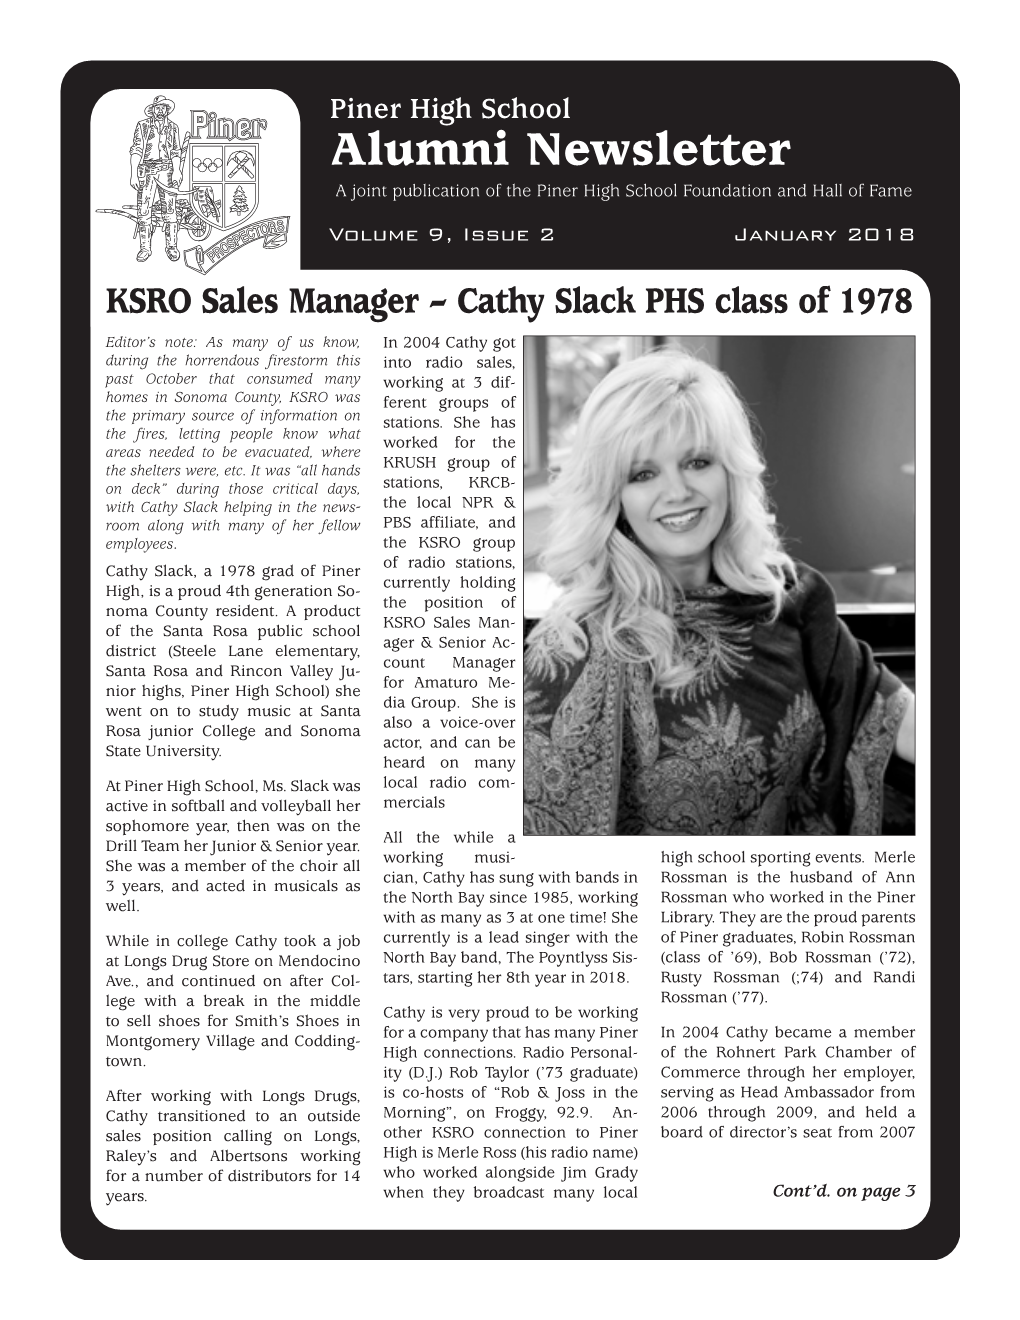 Alumni Newsletter a Joint Publication of the Piner High School Foundation and Hall of Fame Volume 9, Issue 2 January 2018